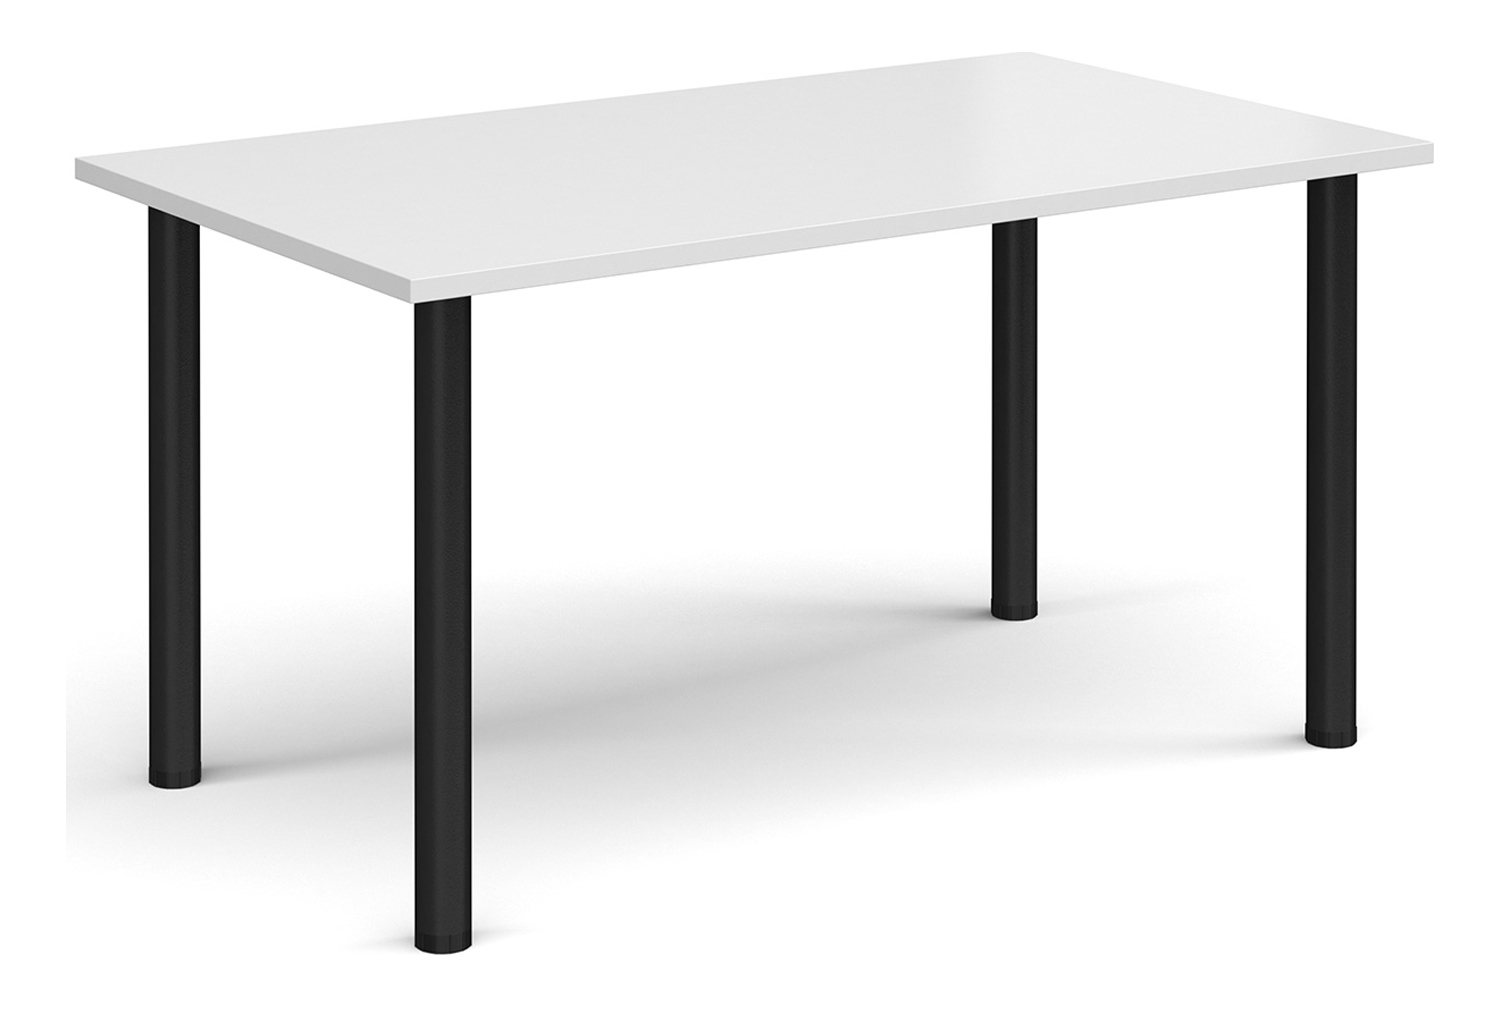 Rosetti Rectangular Meeting Table, 140wx80dx73h (cm), White, Express Delivery